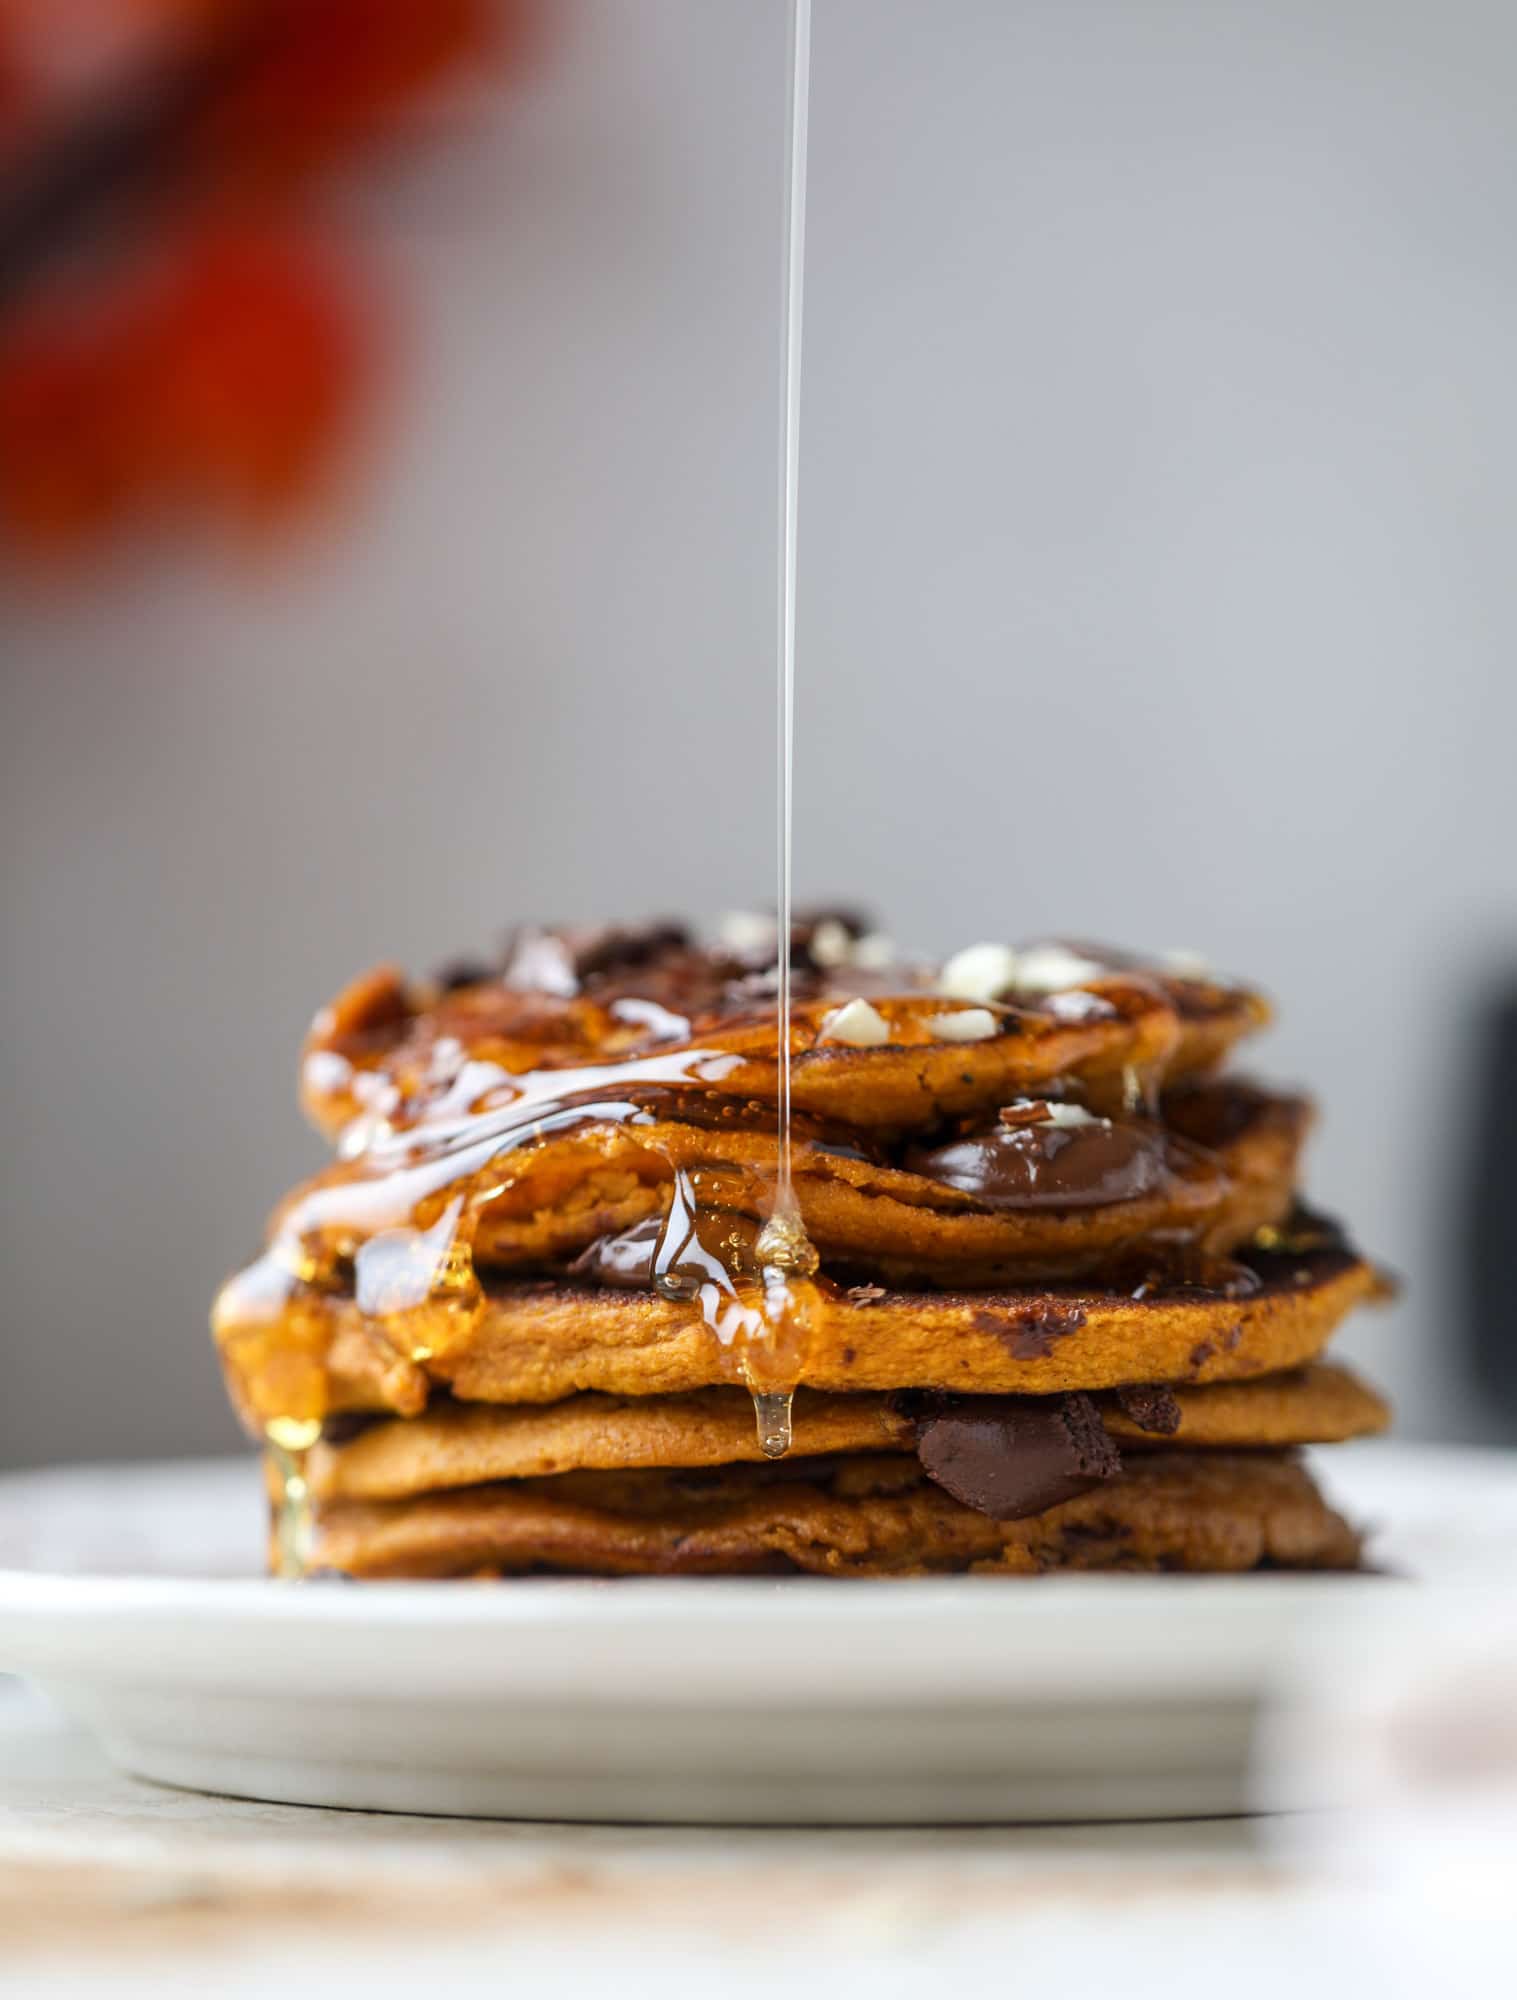 These pumpkin protein pancakes are packed with delicious ingredients to make a healthy and satisfying fall breakfast! They are super easy - you throw everything into a blender to create the most incredible protein pancakes! I howsweeteats.com #protein #pancakes #pumpkin #breakfast #fall